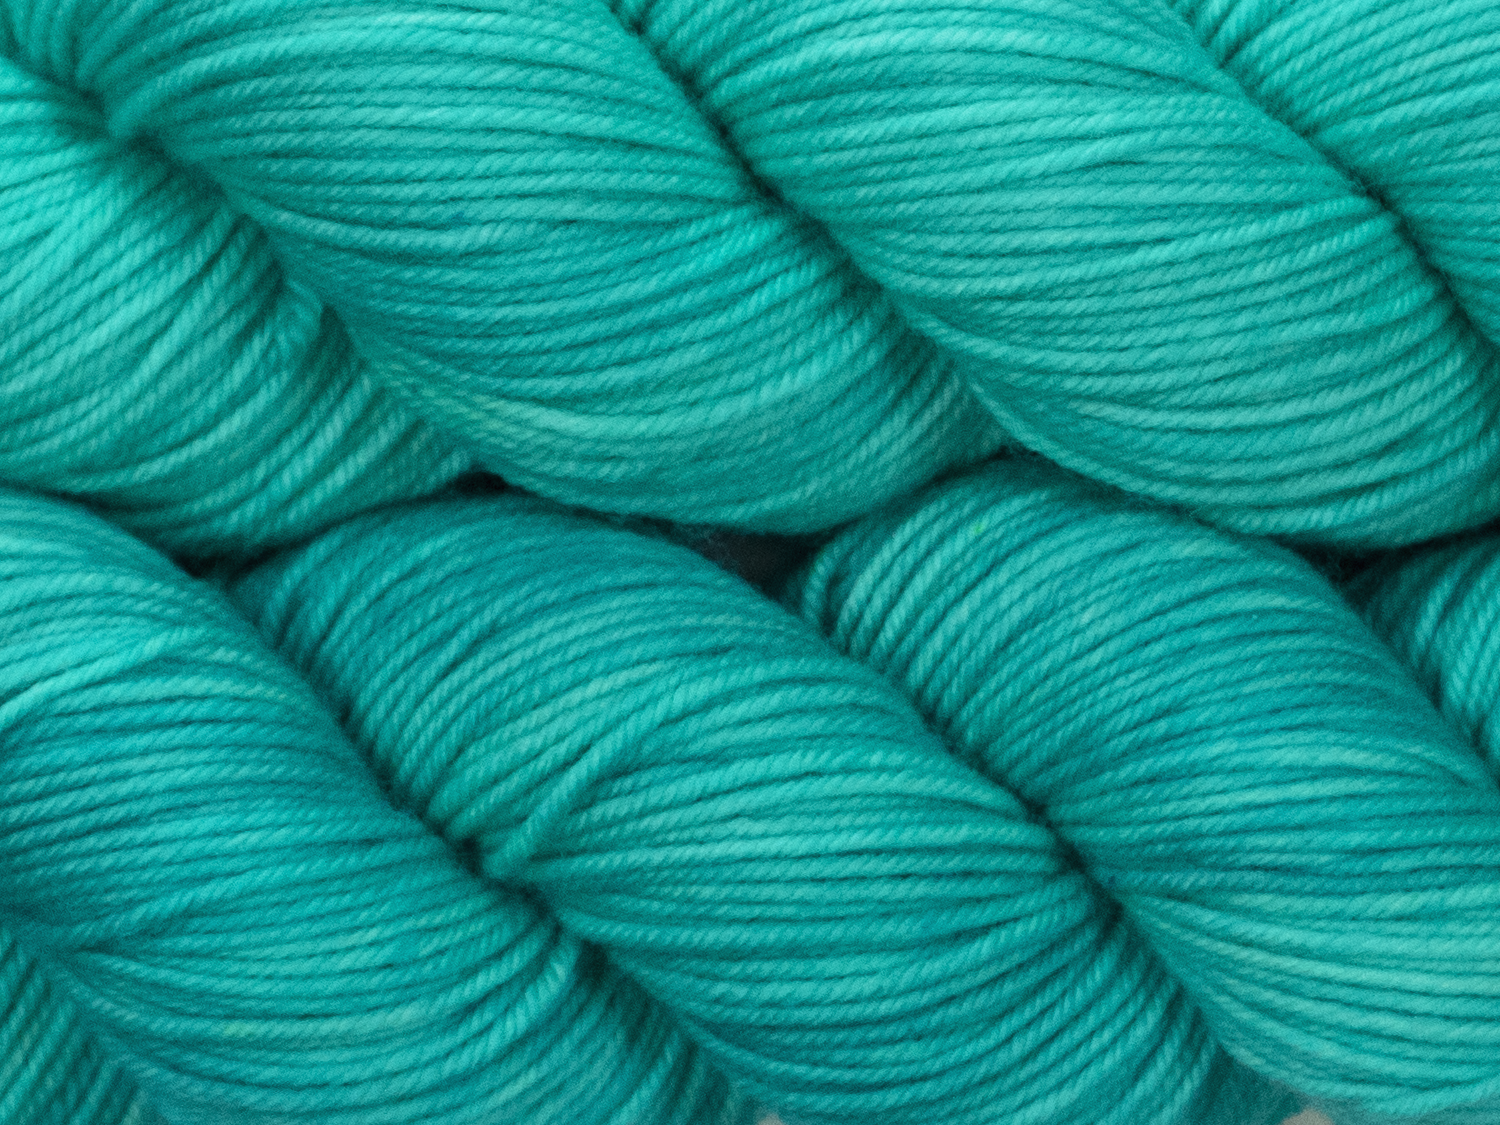 Close-Up Photo of DK Weight yarn in "As Cold As Ice"